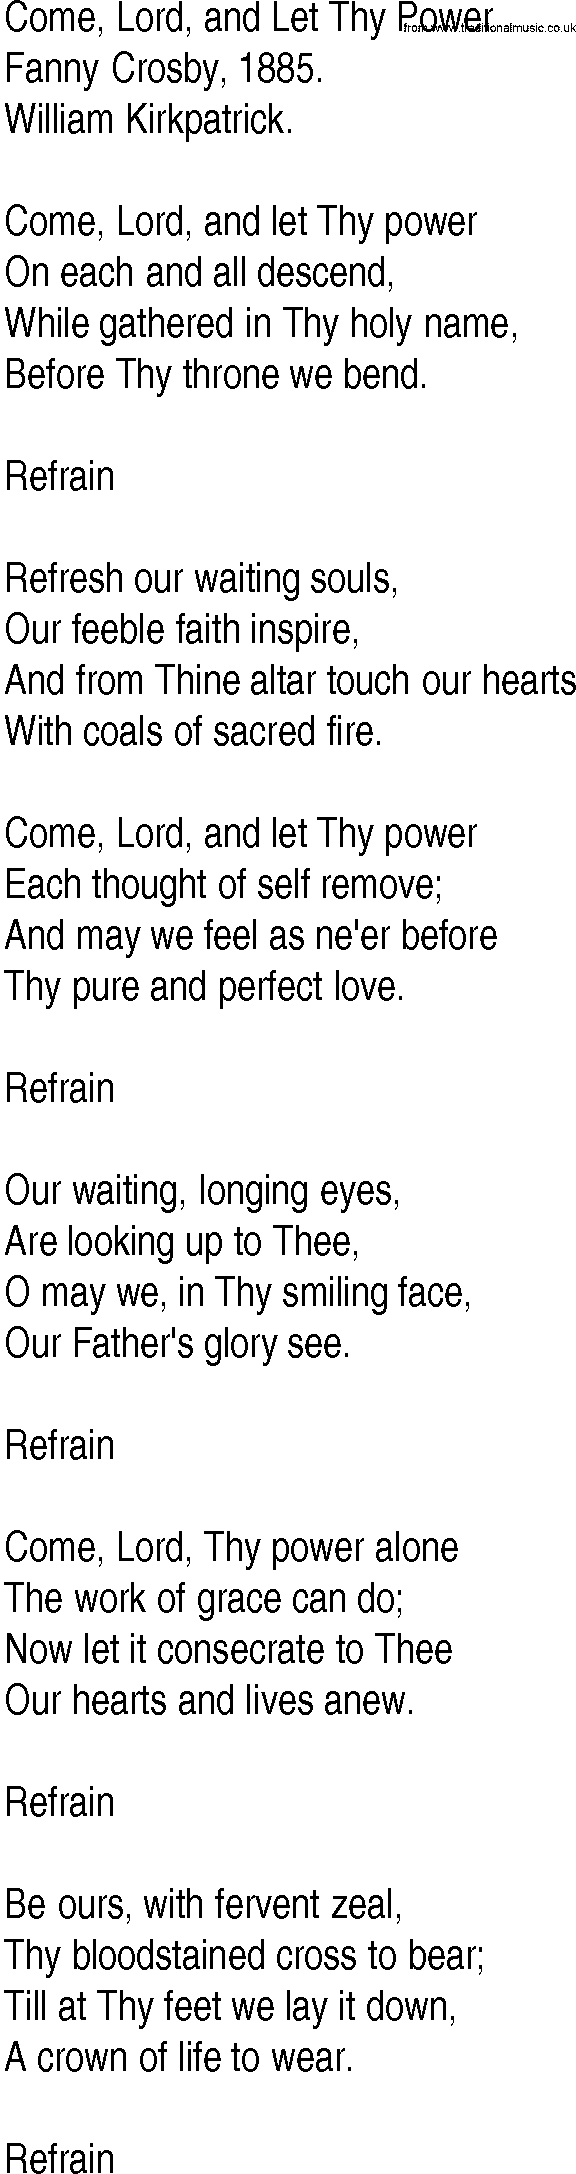 Hymn and Gospel Song: Come, Lord, and Let Thy Power by Fanny Crosby lyrics